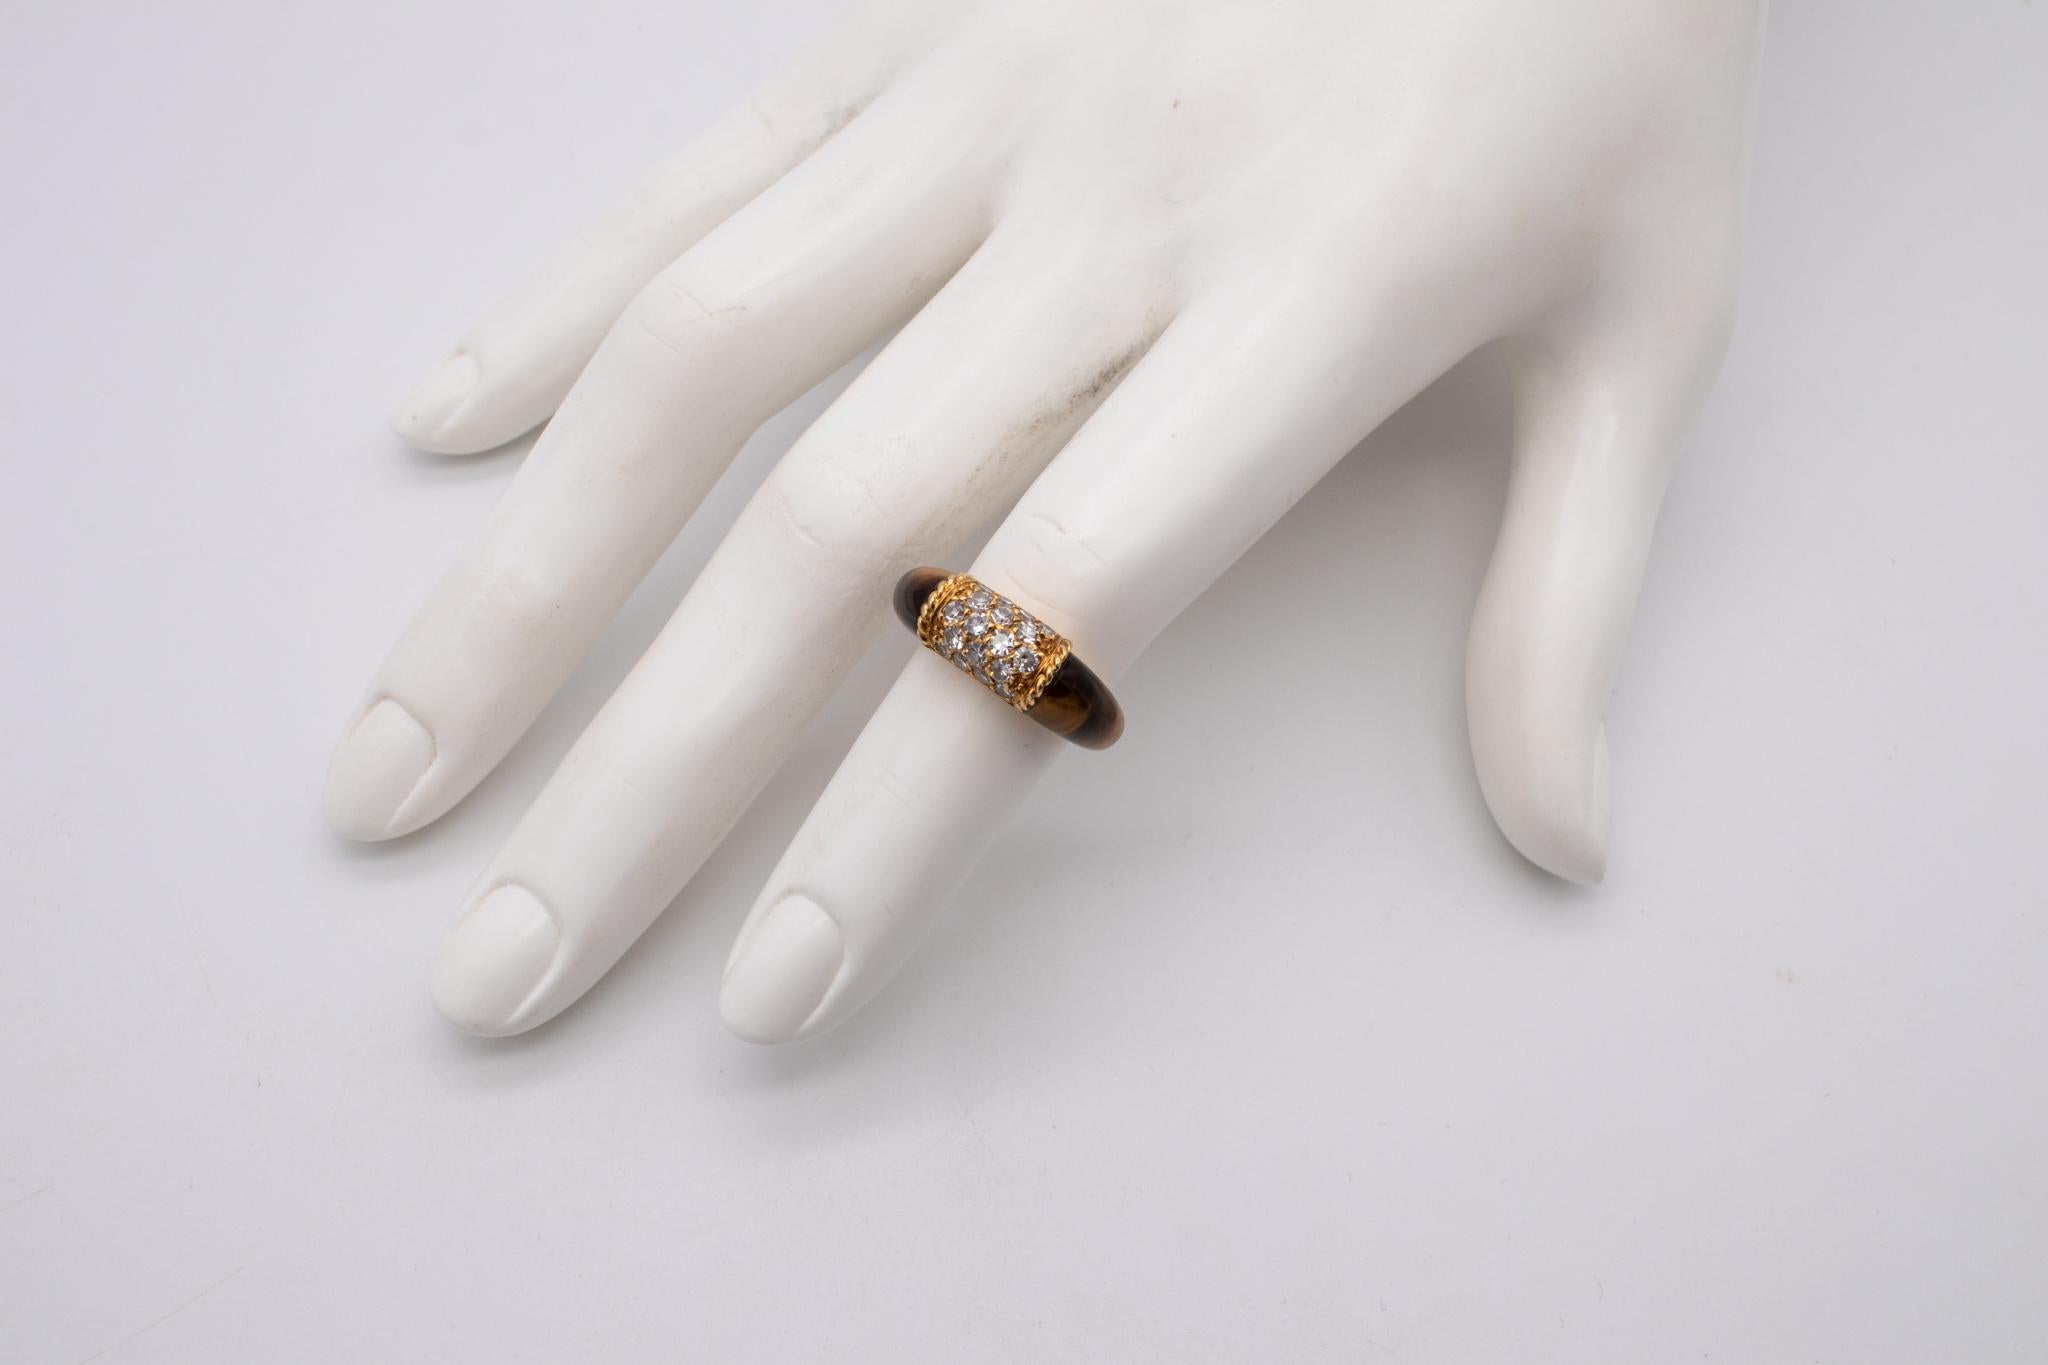 Classic Philippines ring designed by Van Cleef & Arpels.

A vintage ring manufactured in Paris, France by the house of Van Cleef & Arpels around the 1960's, It was crafted in solid yellow gold of 18 karats, with high polished finish. This is the